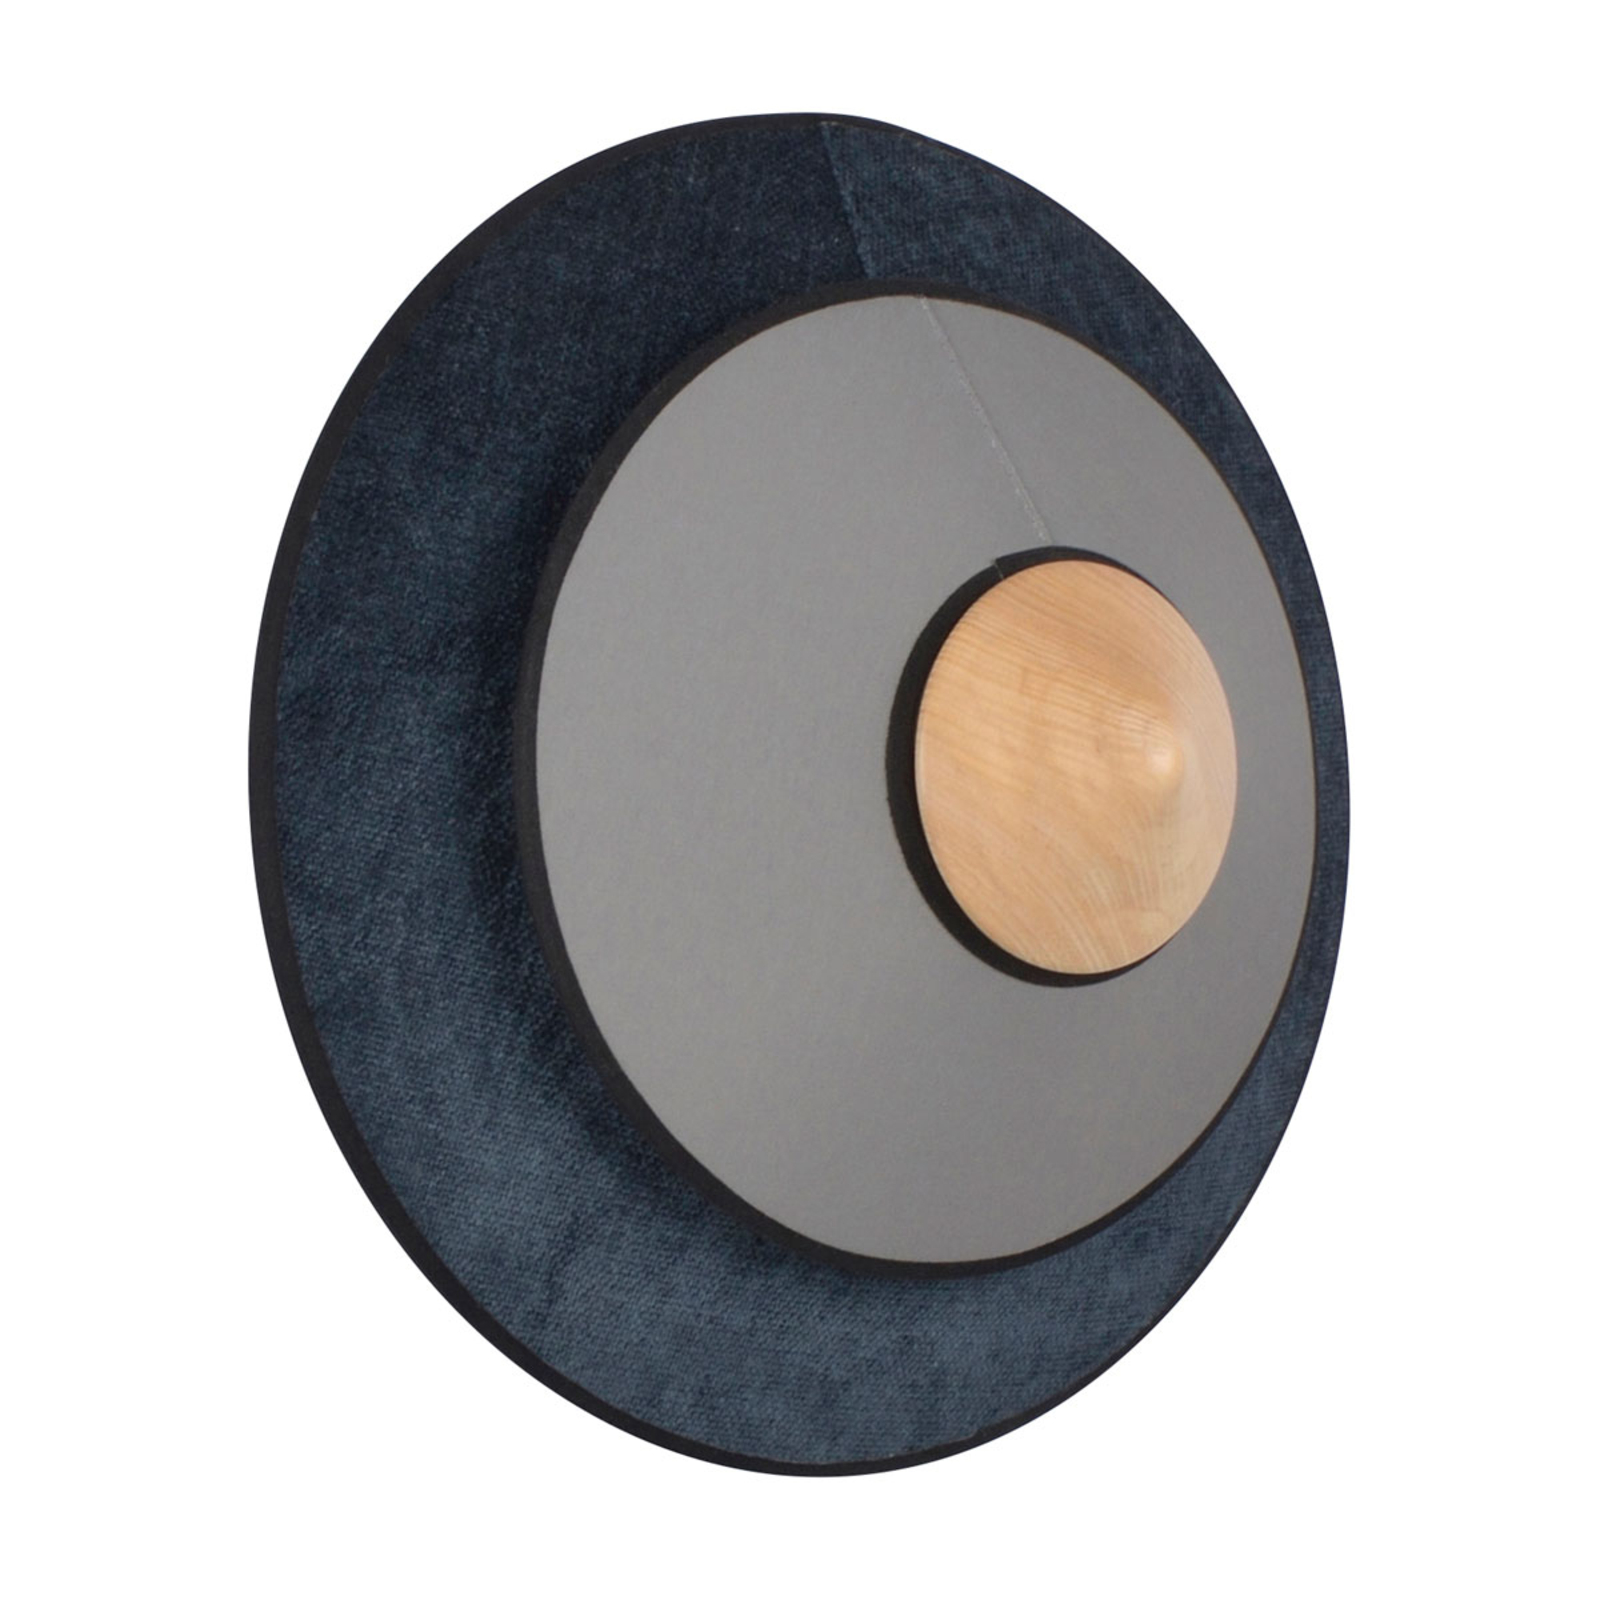 Forestier Cymbal S LED-væglampe, midnat